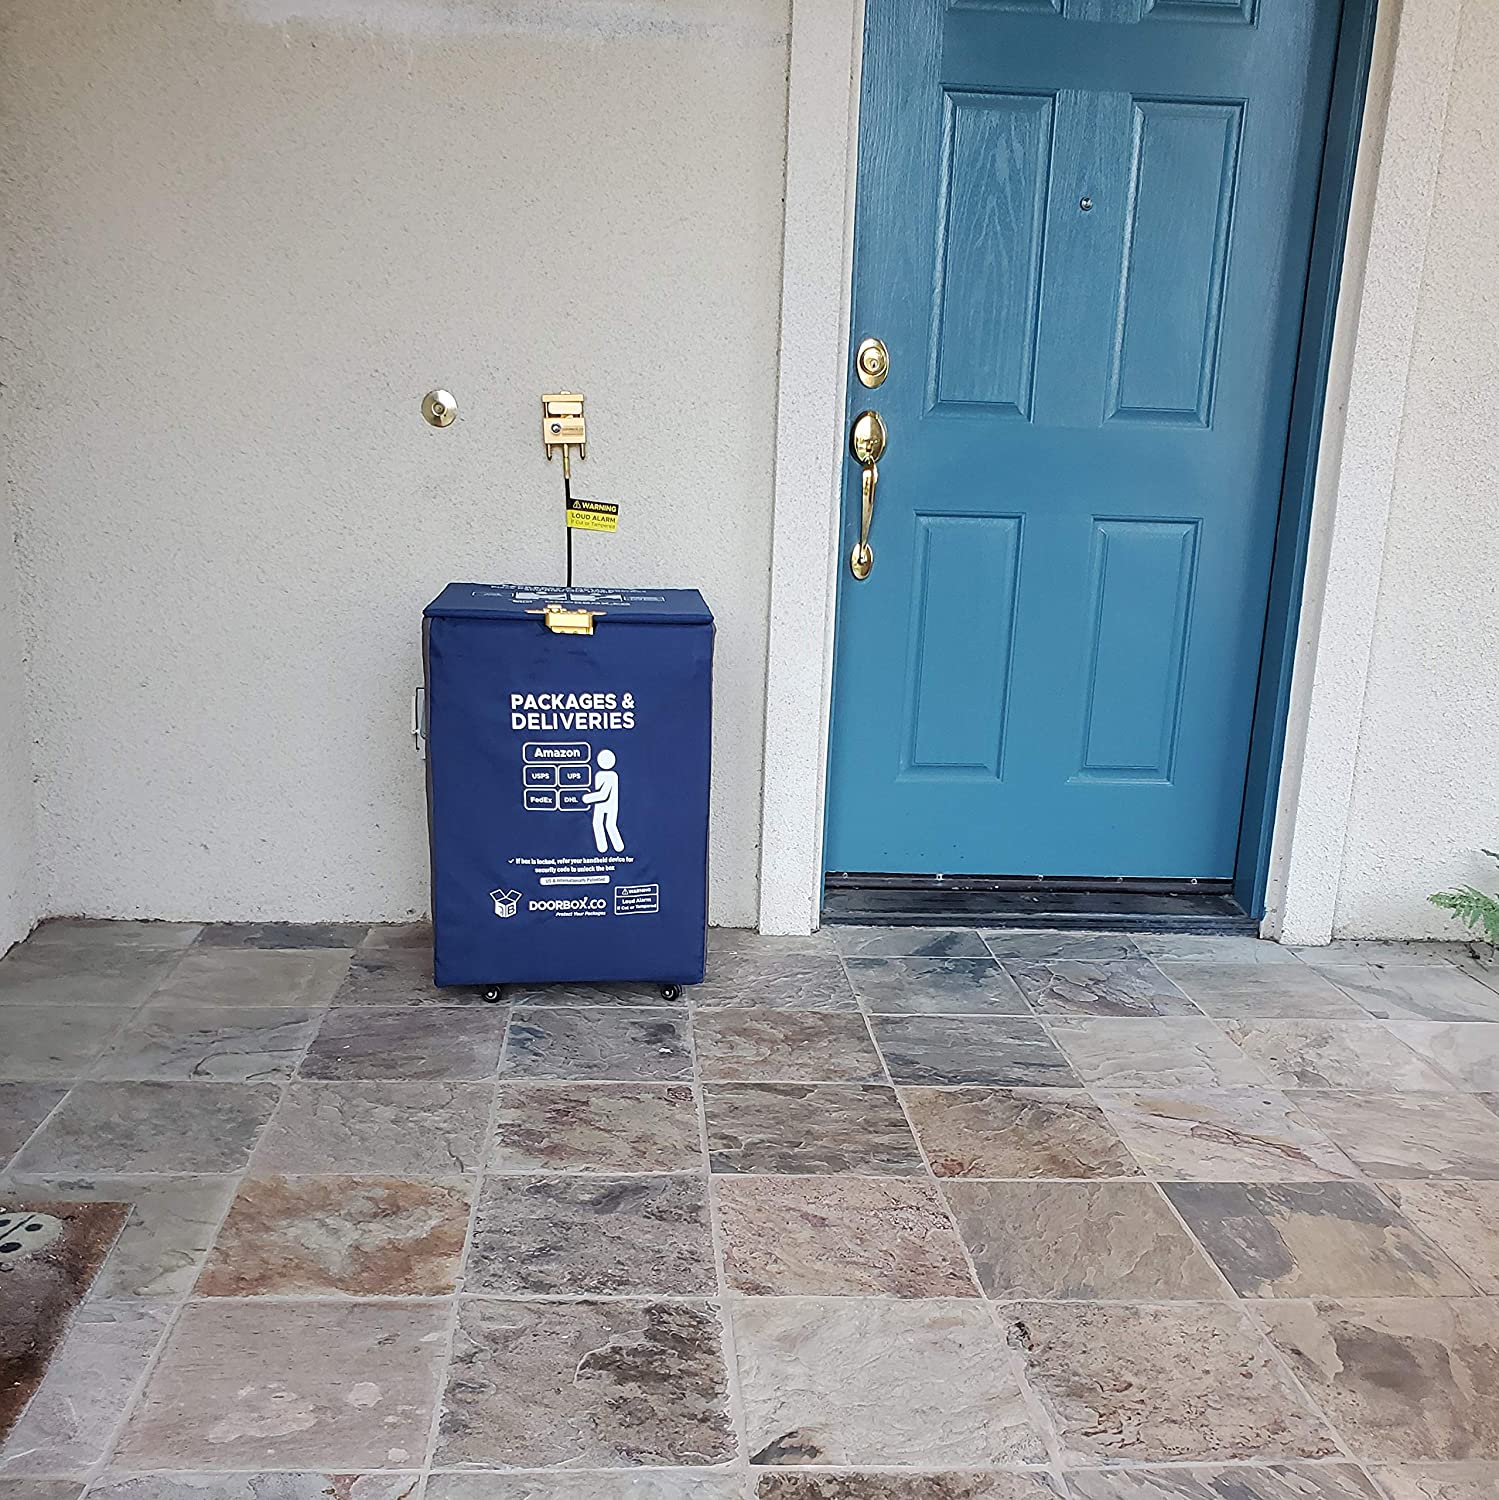 DoorBox Package Delivery Boxes for Outside: Protecting your Packages from Porch Pirates.